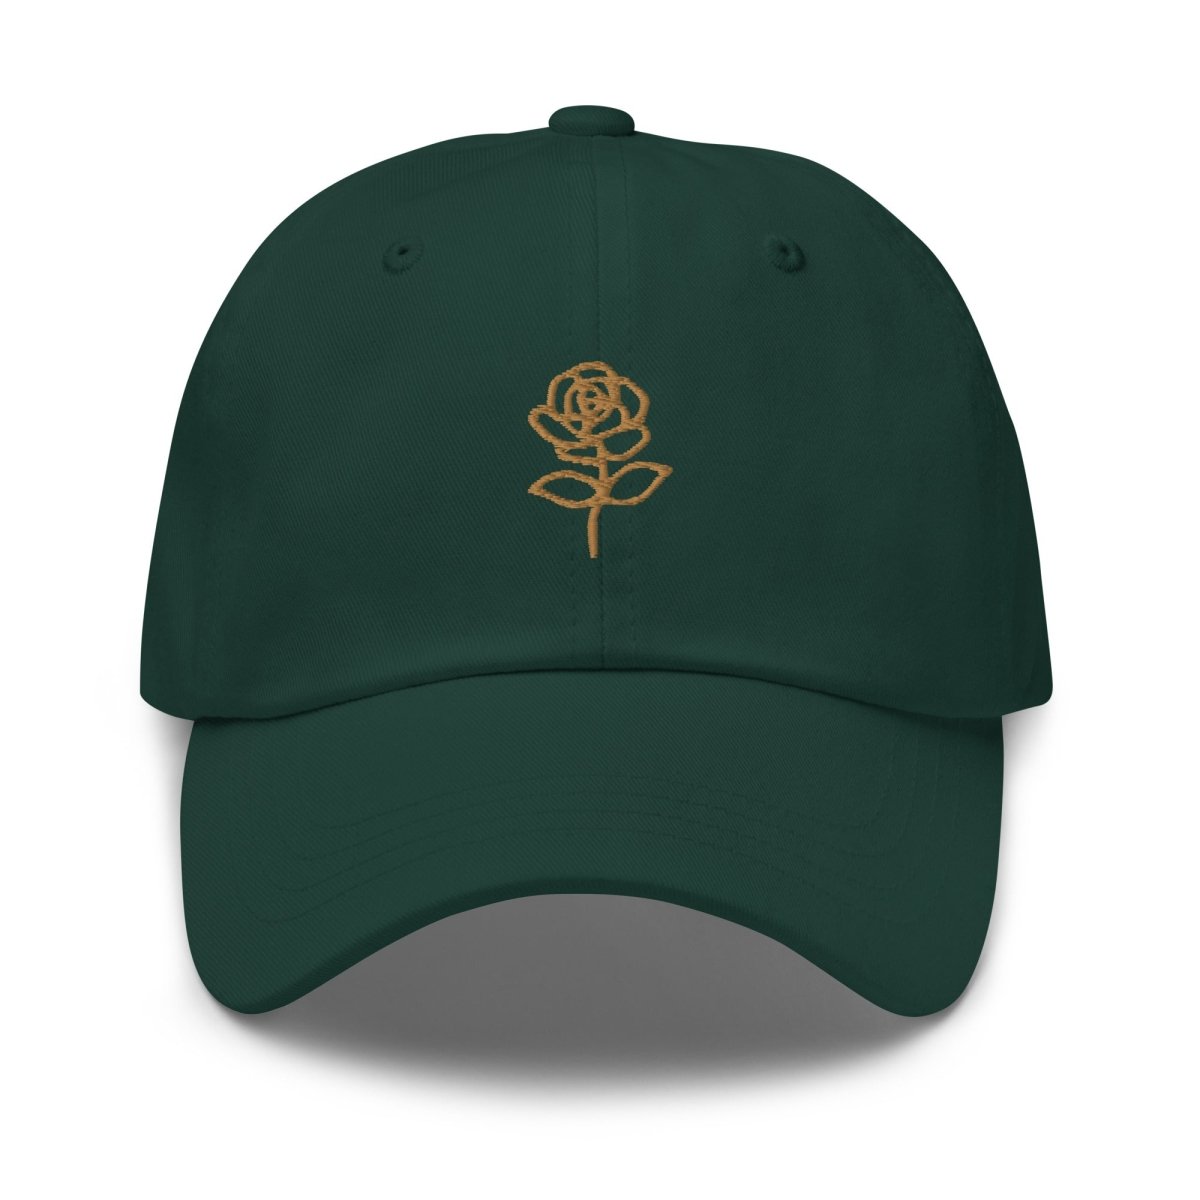 Old Gold Rose Dad hat - Pretty Bad Co.